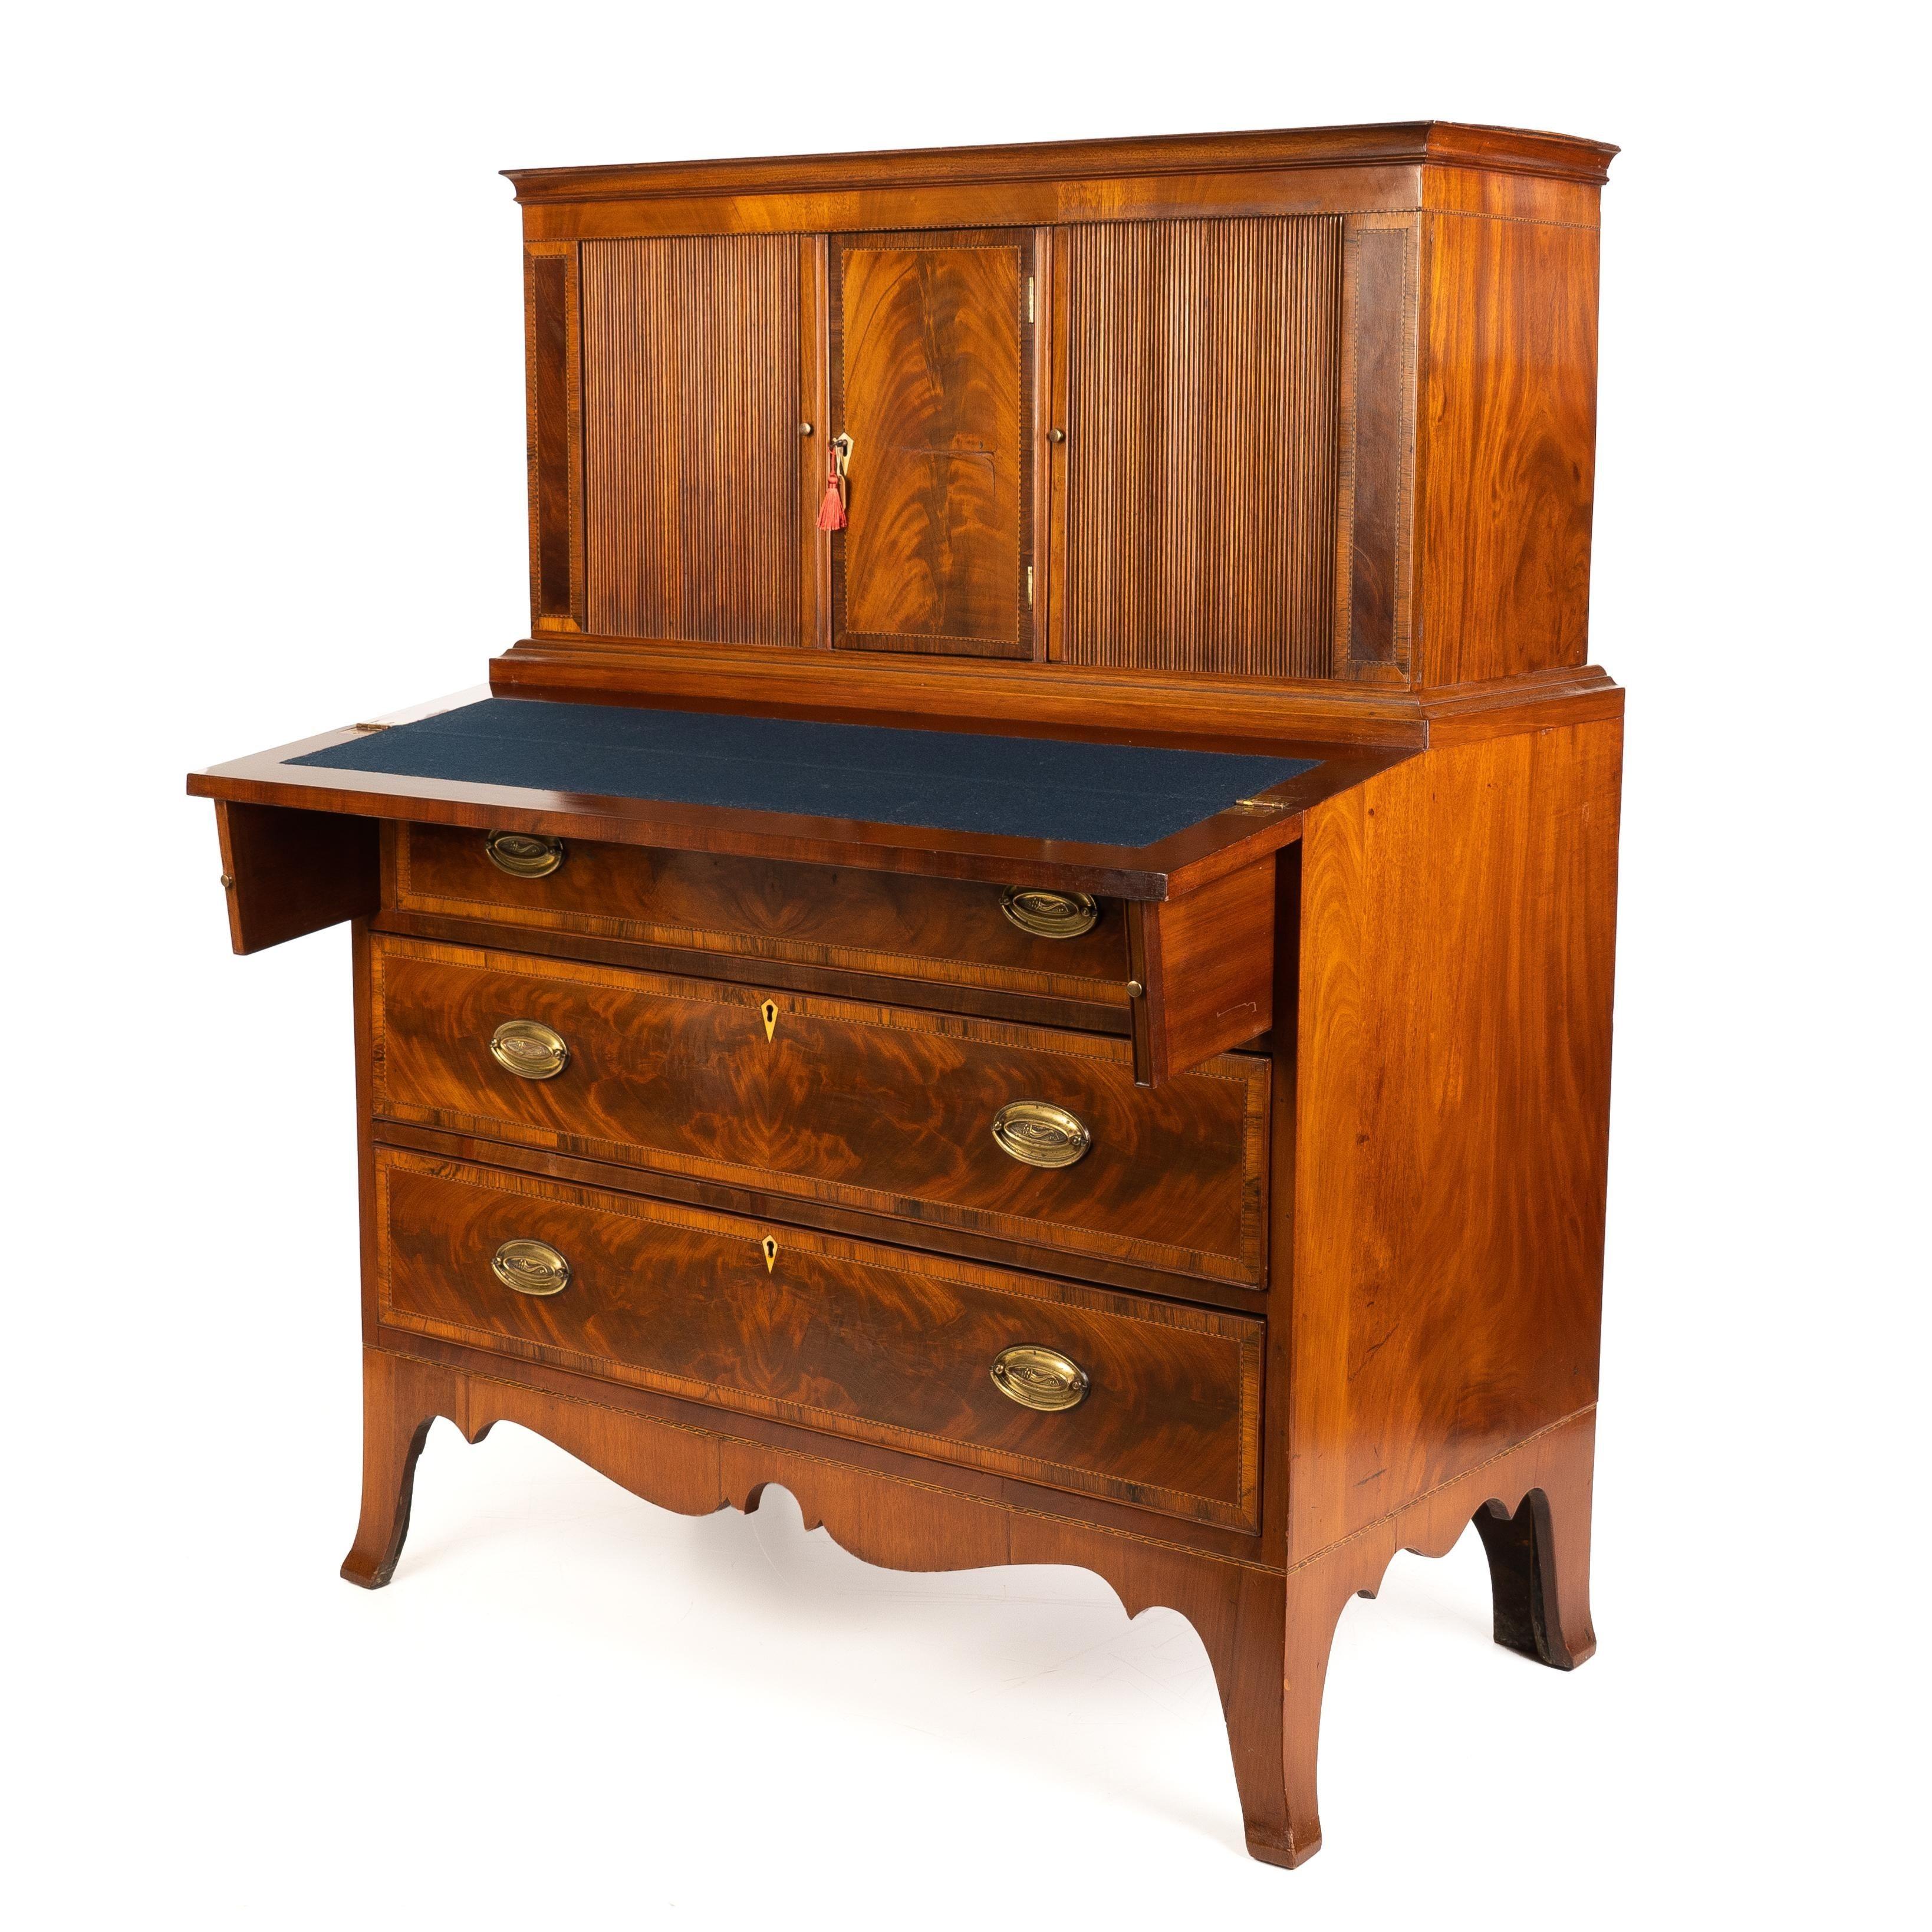 American Hepplewhite tambour secretary flip top desk. Composed of mahogany solids and figured mahogany veneers along with contrasting patterned string inlays and rosewood cross banding. The case has three graduated cock beaded drawers fitted with